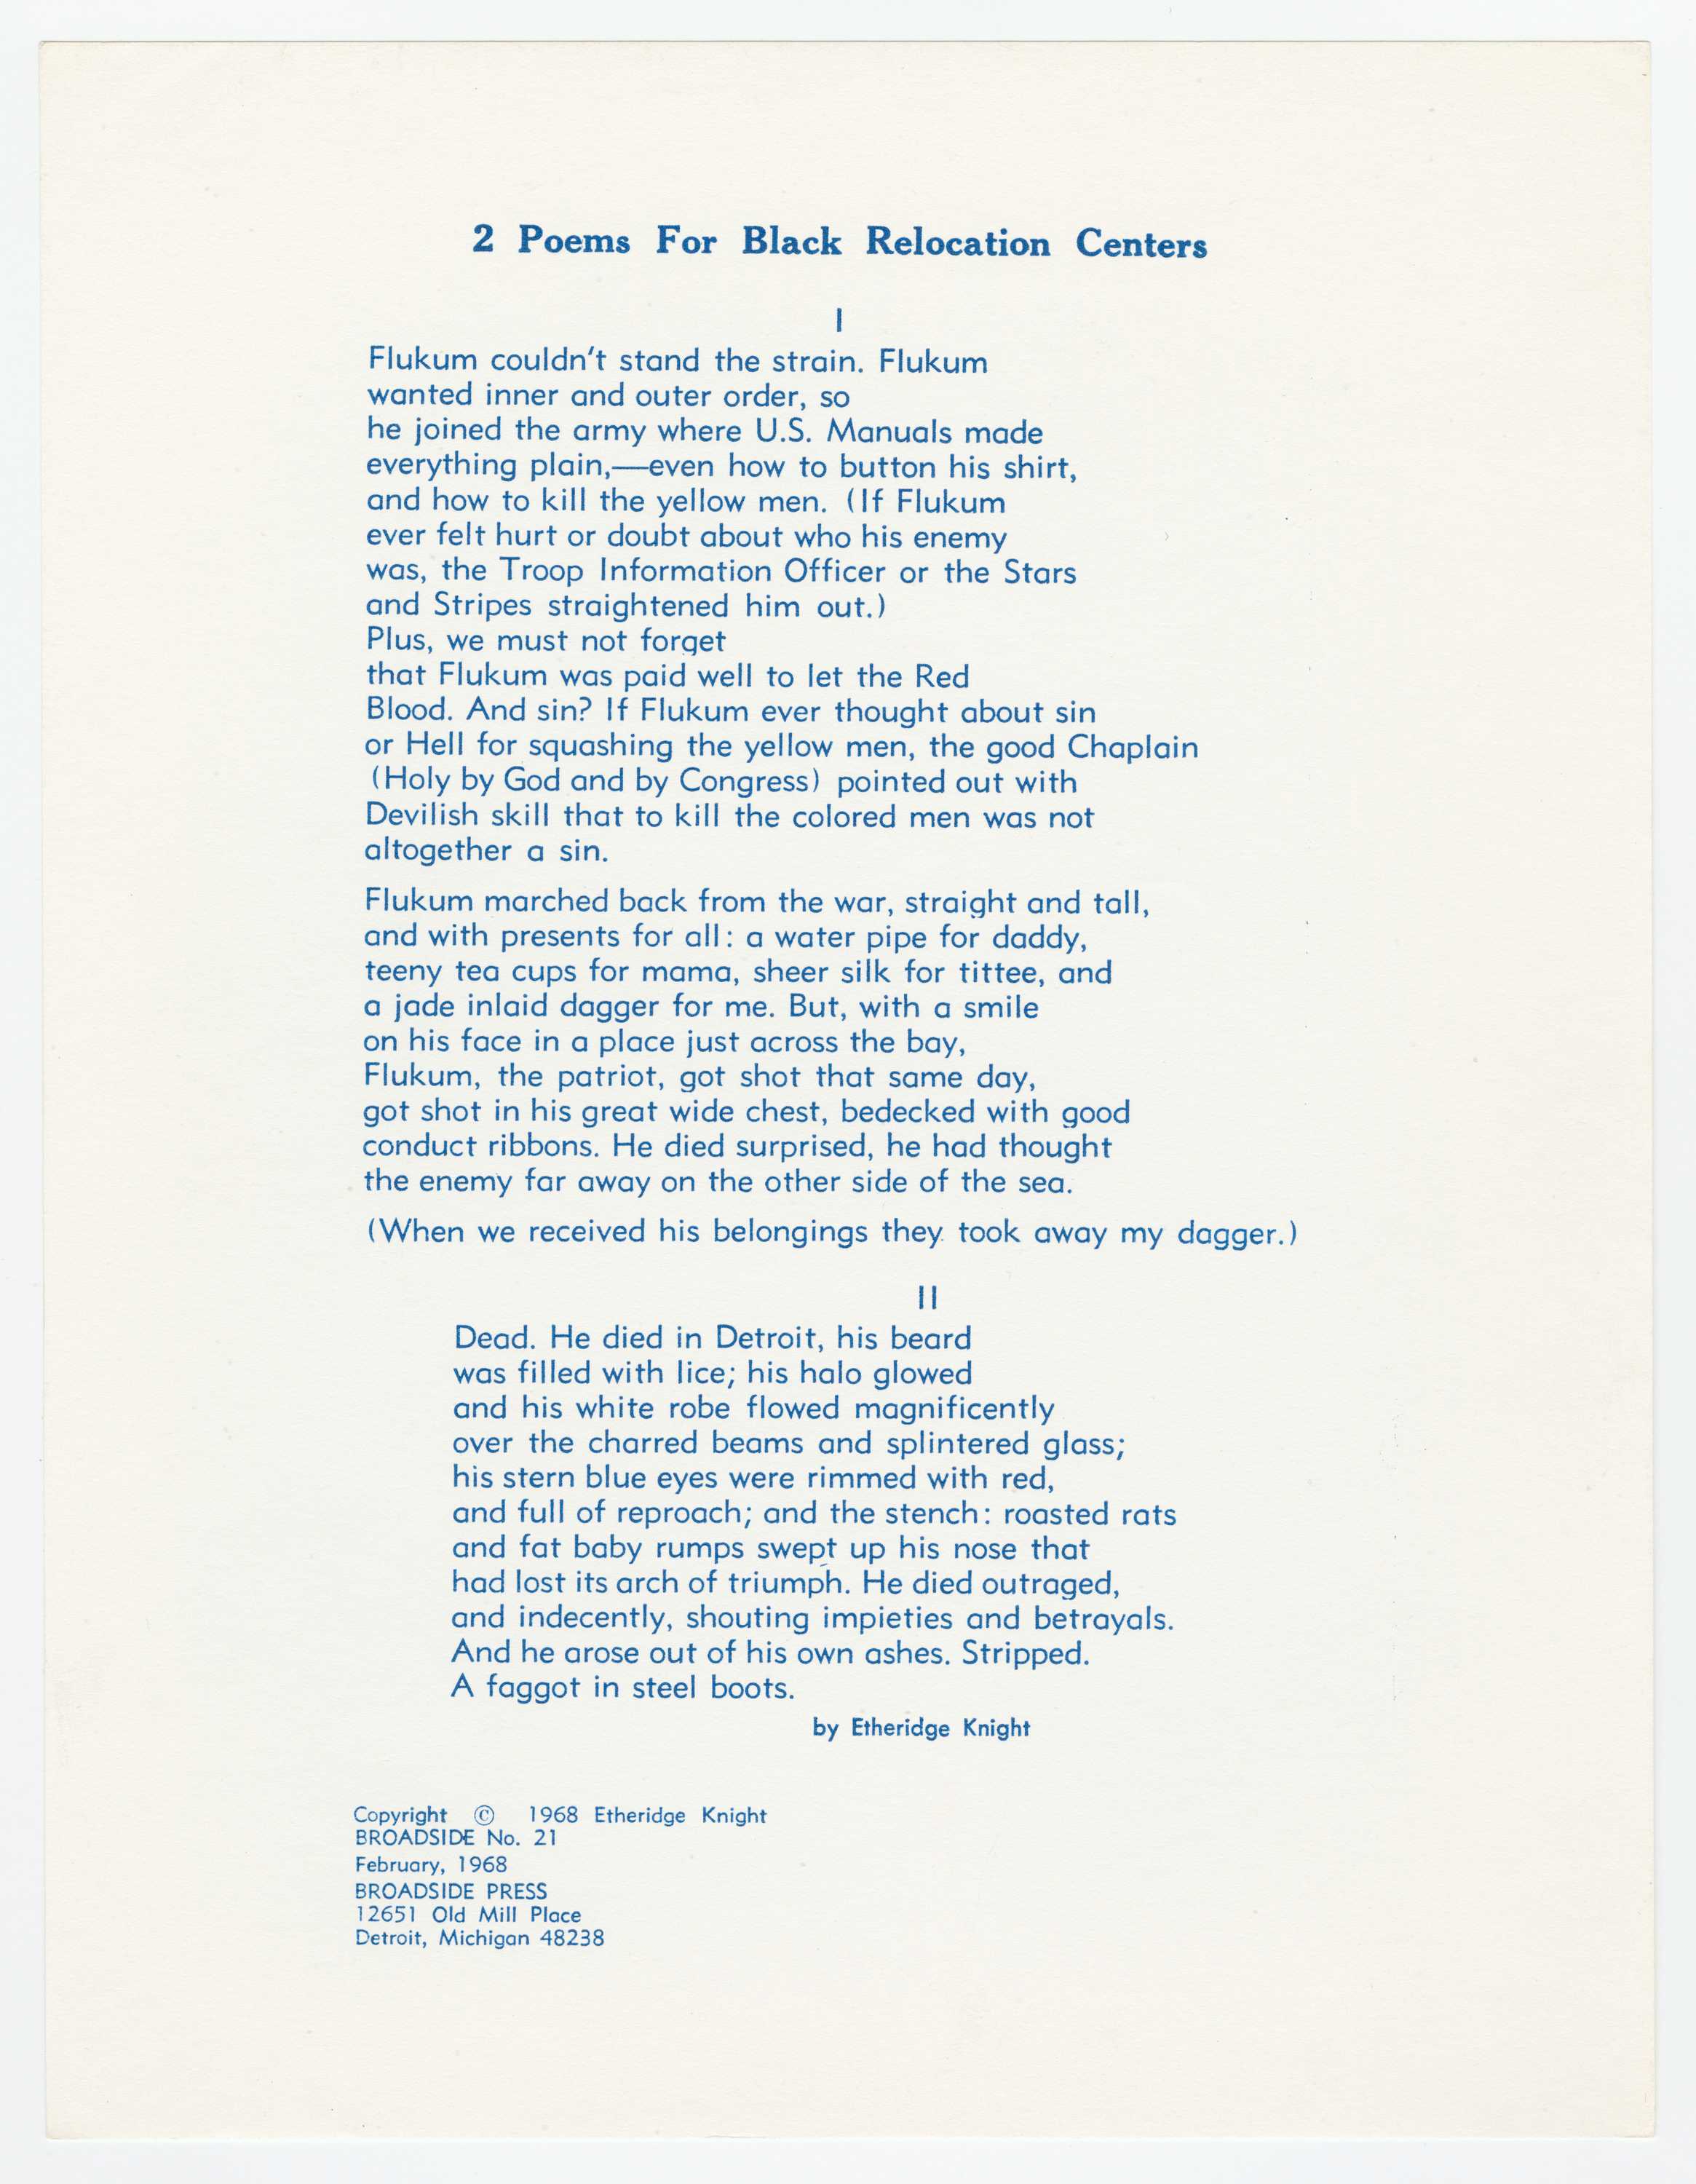 A collection of poems titled 2 Poems For Black Relocation Centers written by Etheridge Knight and published by Broadside Press as Broadside No. 21. The poem is on white paper with and printed in blue ink.